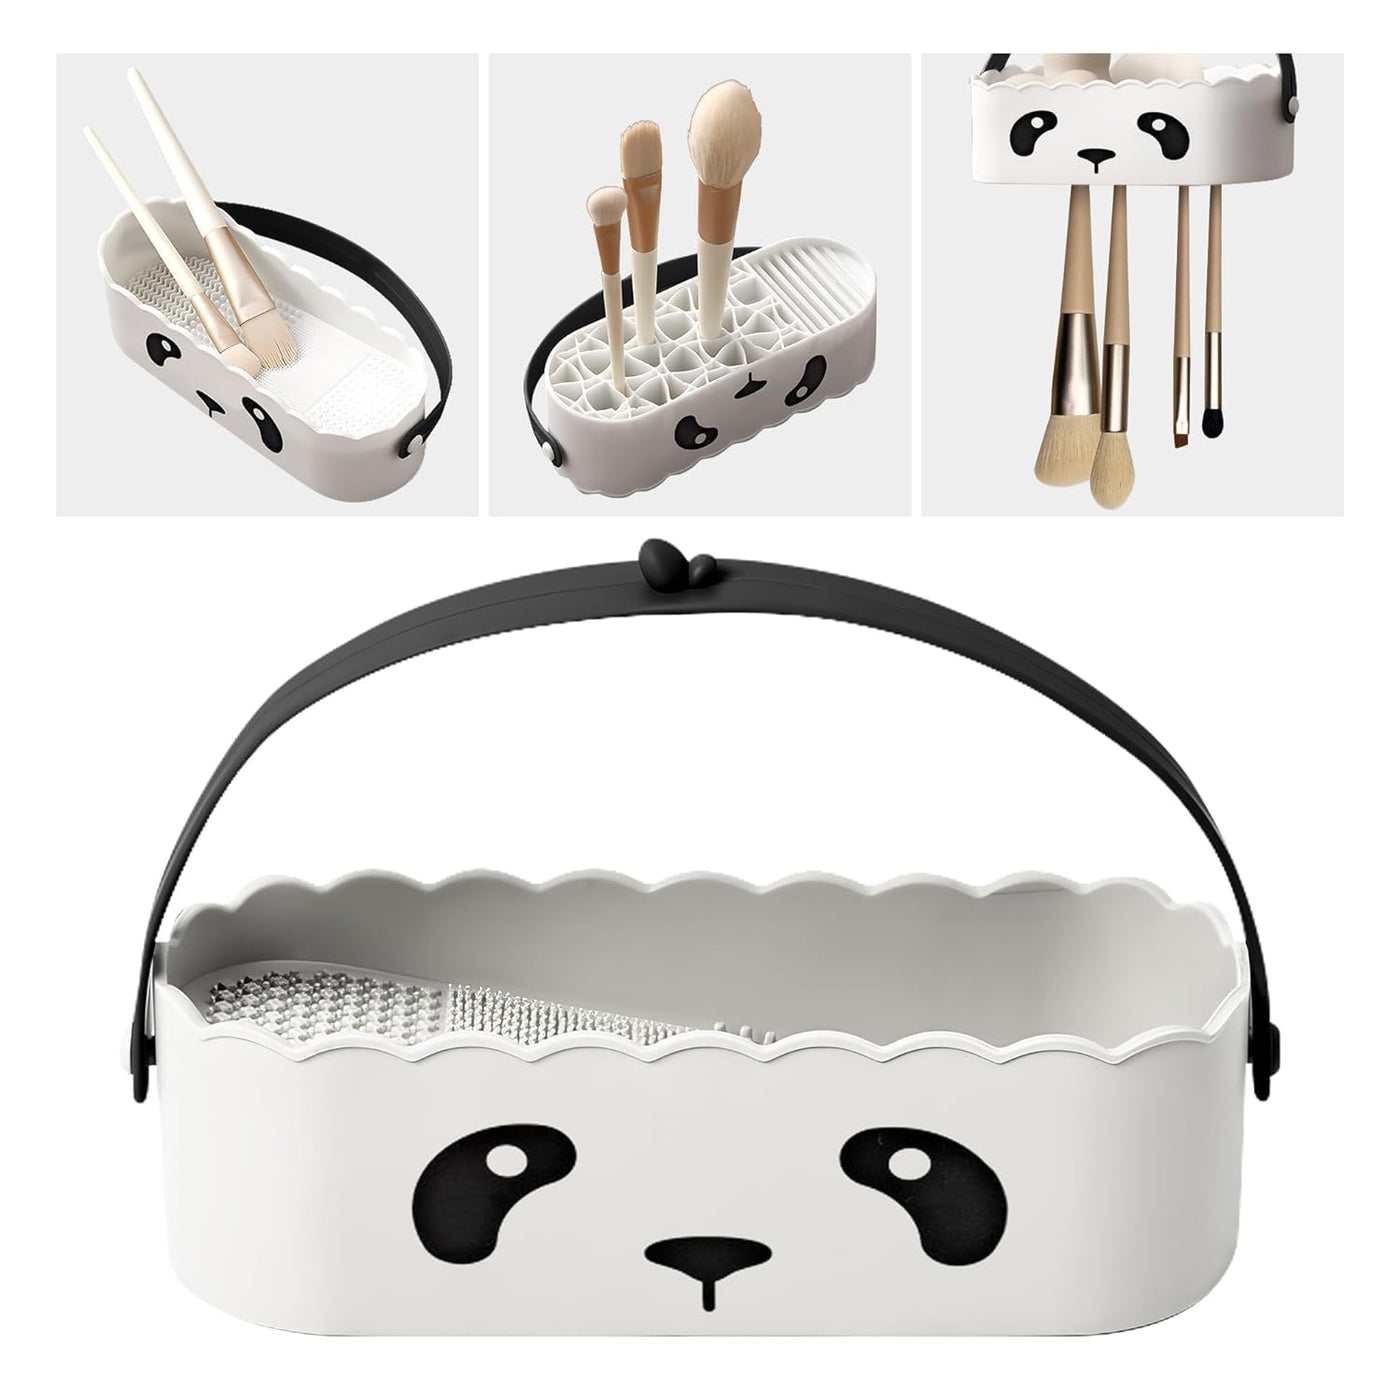 Makeup Brush Cleaning Tool with Drying Holder Mat